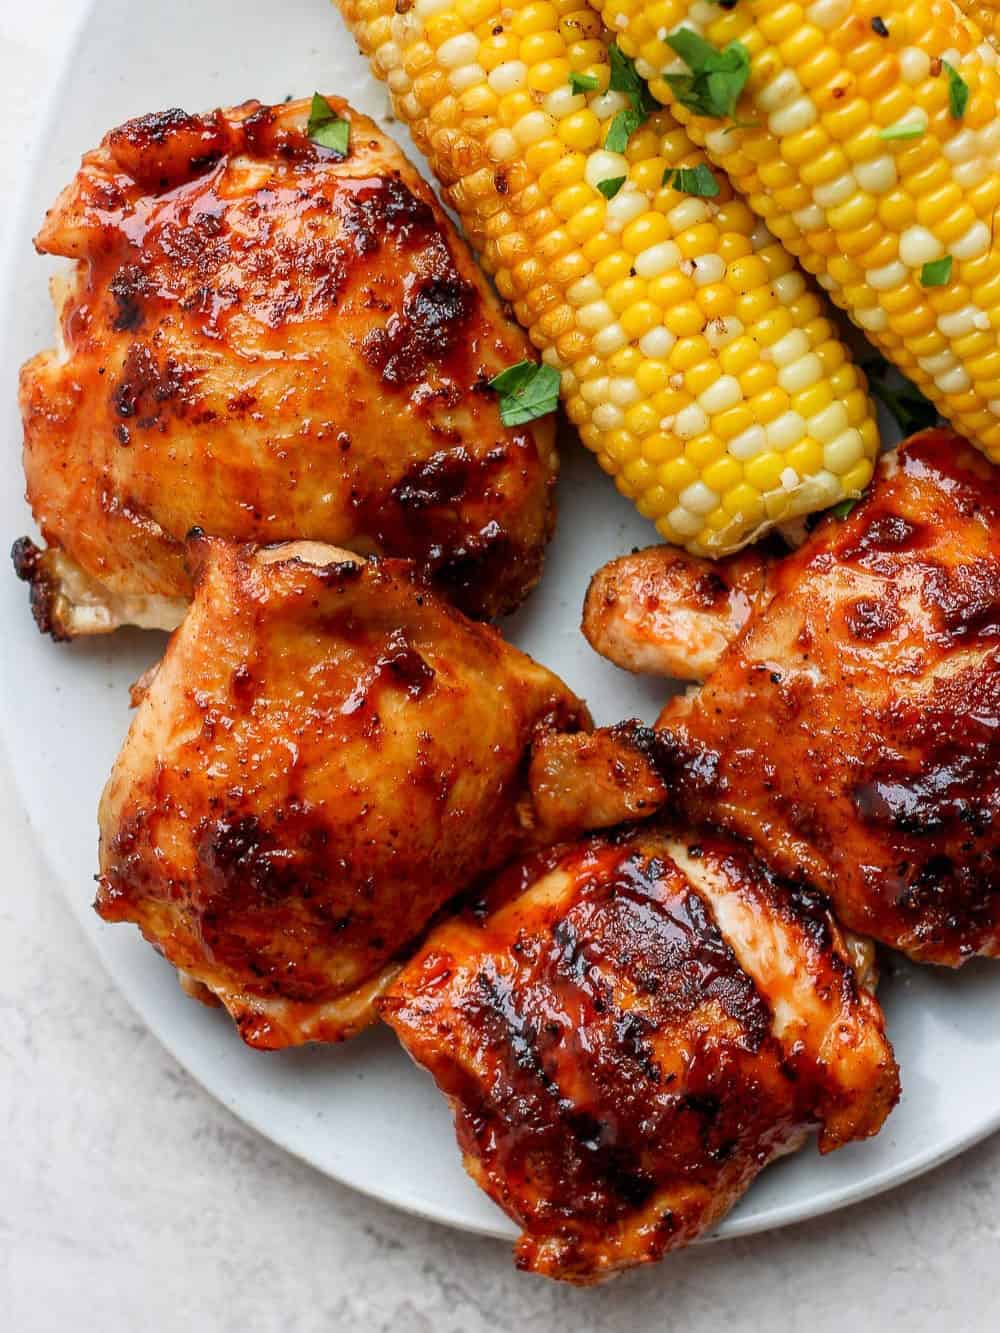 10 Best Grill Recipes - Fit Foodie Finds